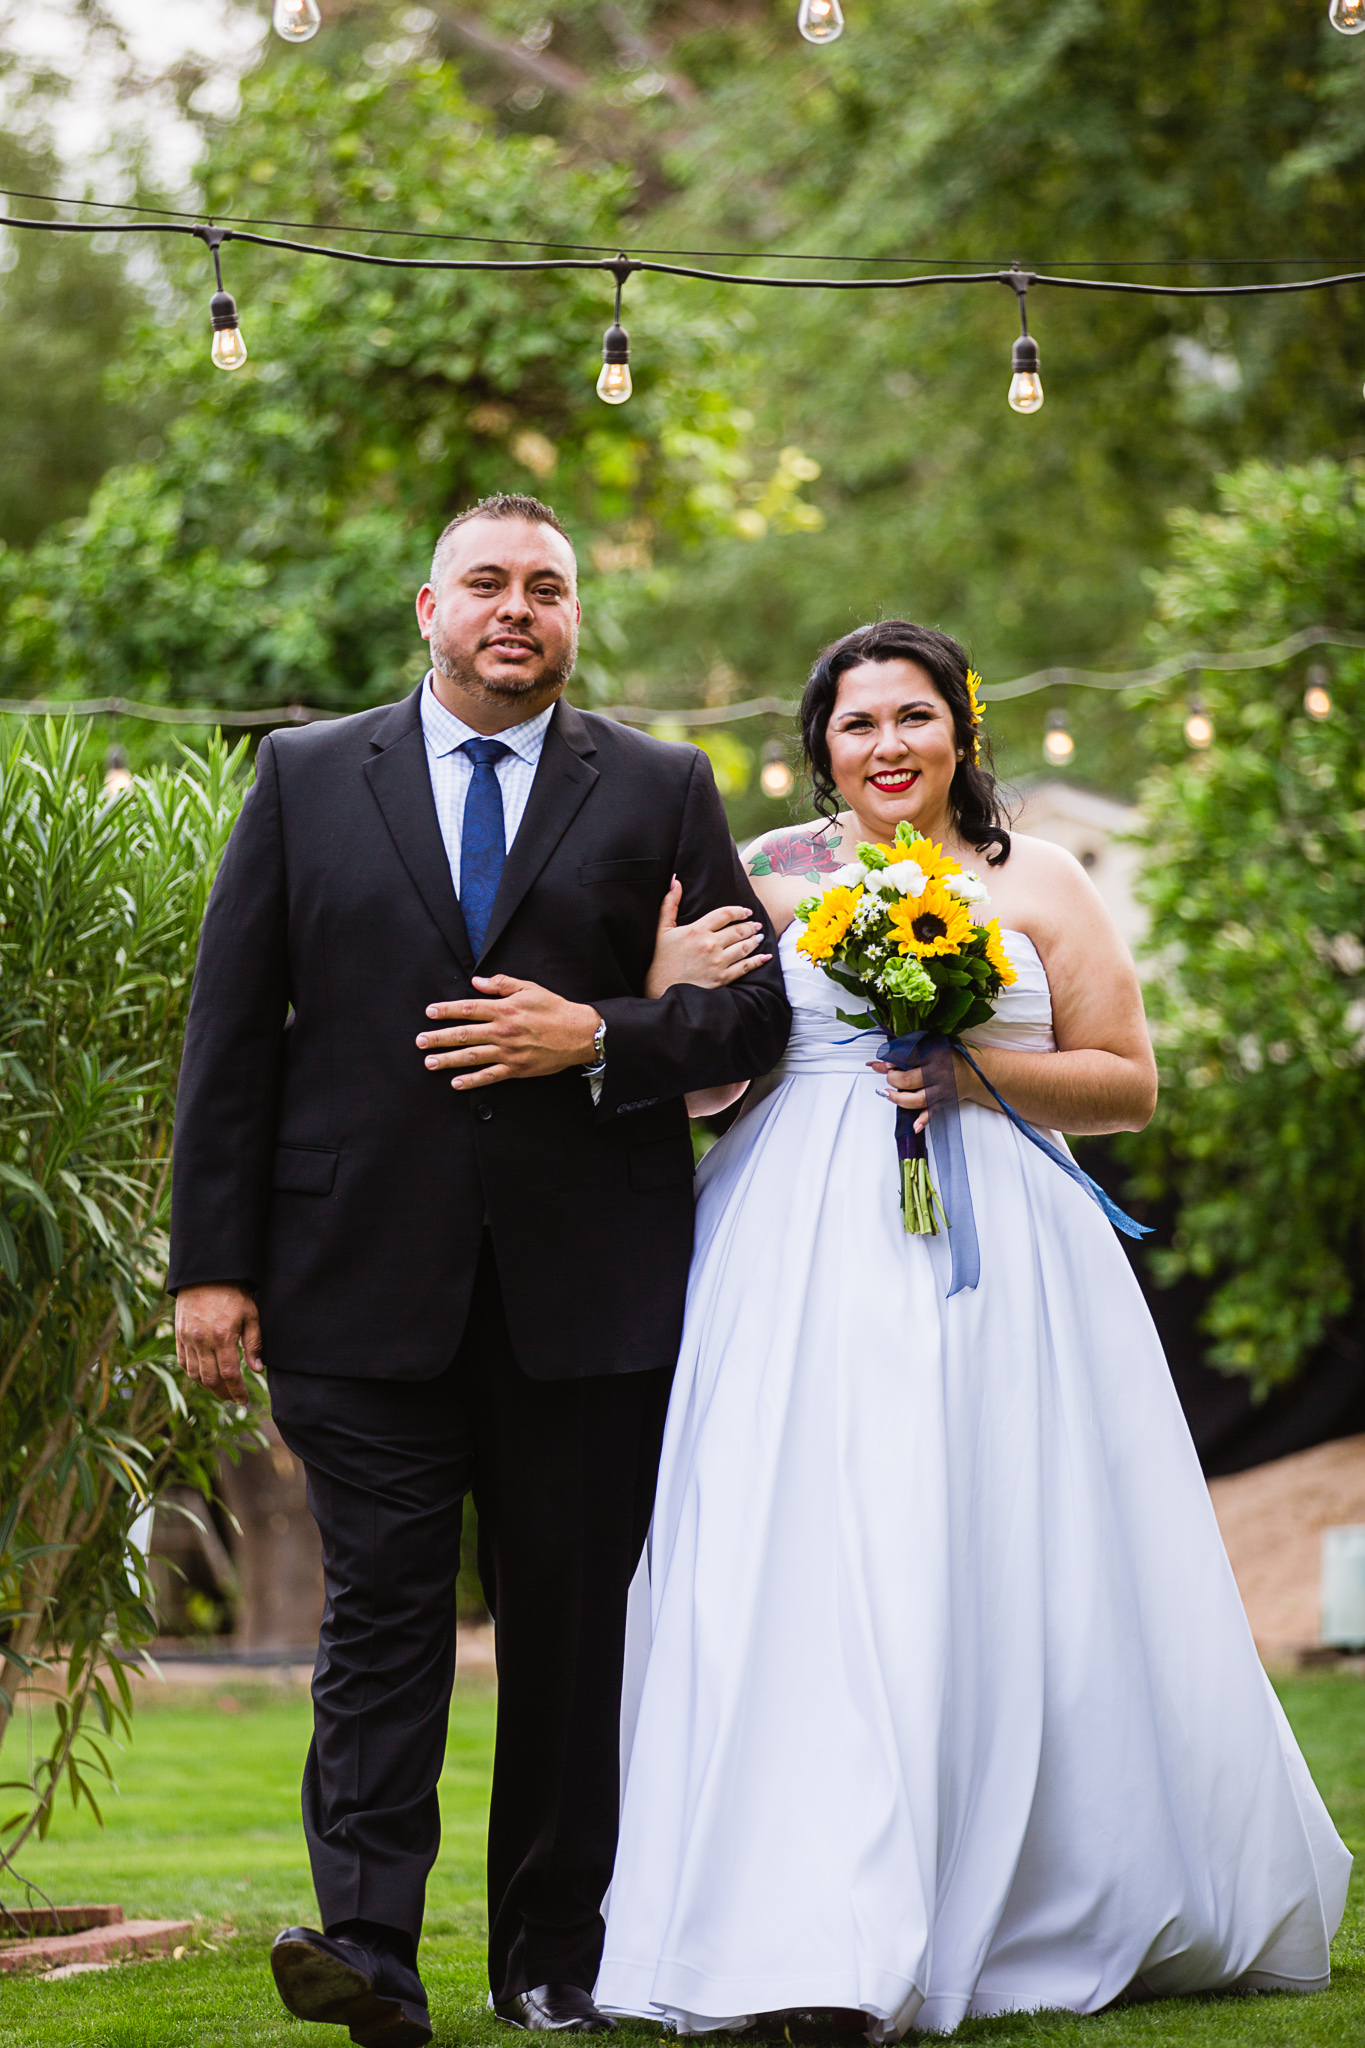 Bride walking down the aisle with her uncle at her backyard garden wedding ceremony by Phoenix wedding photographer PMA Photography.